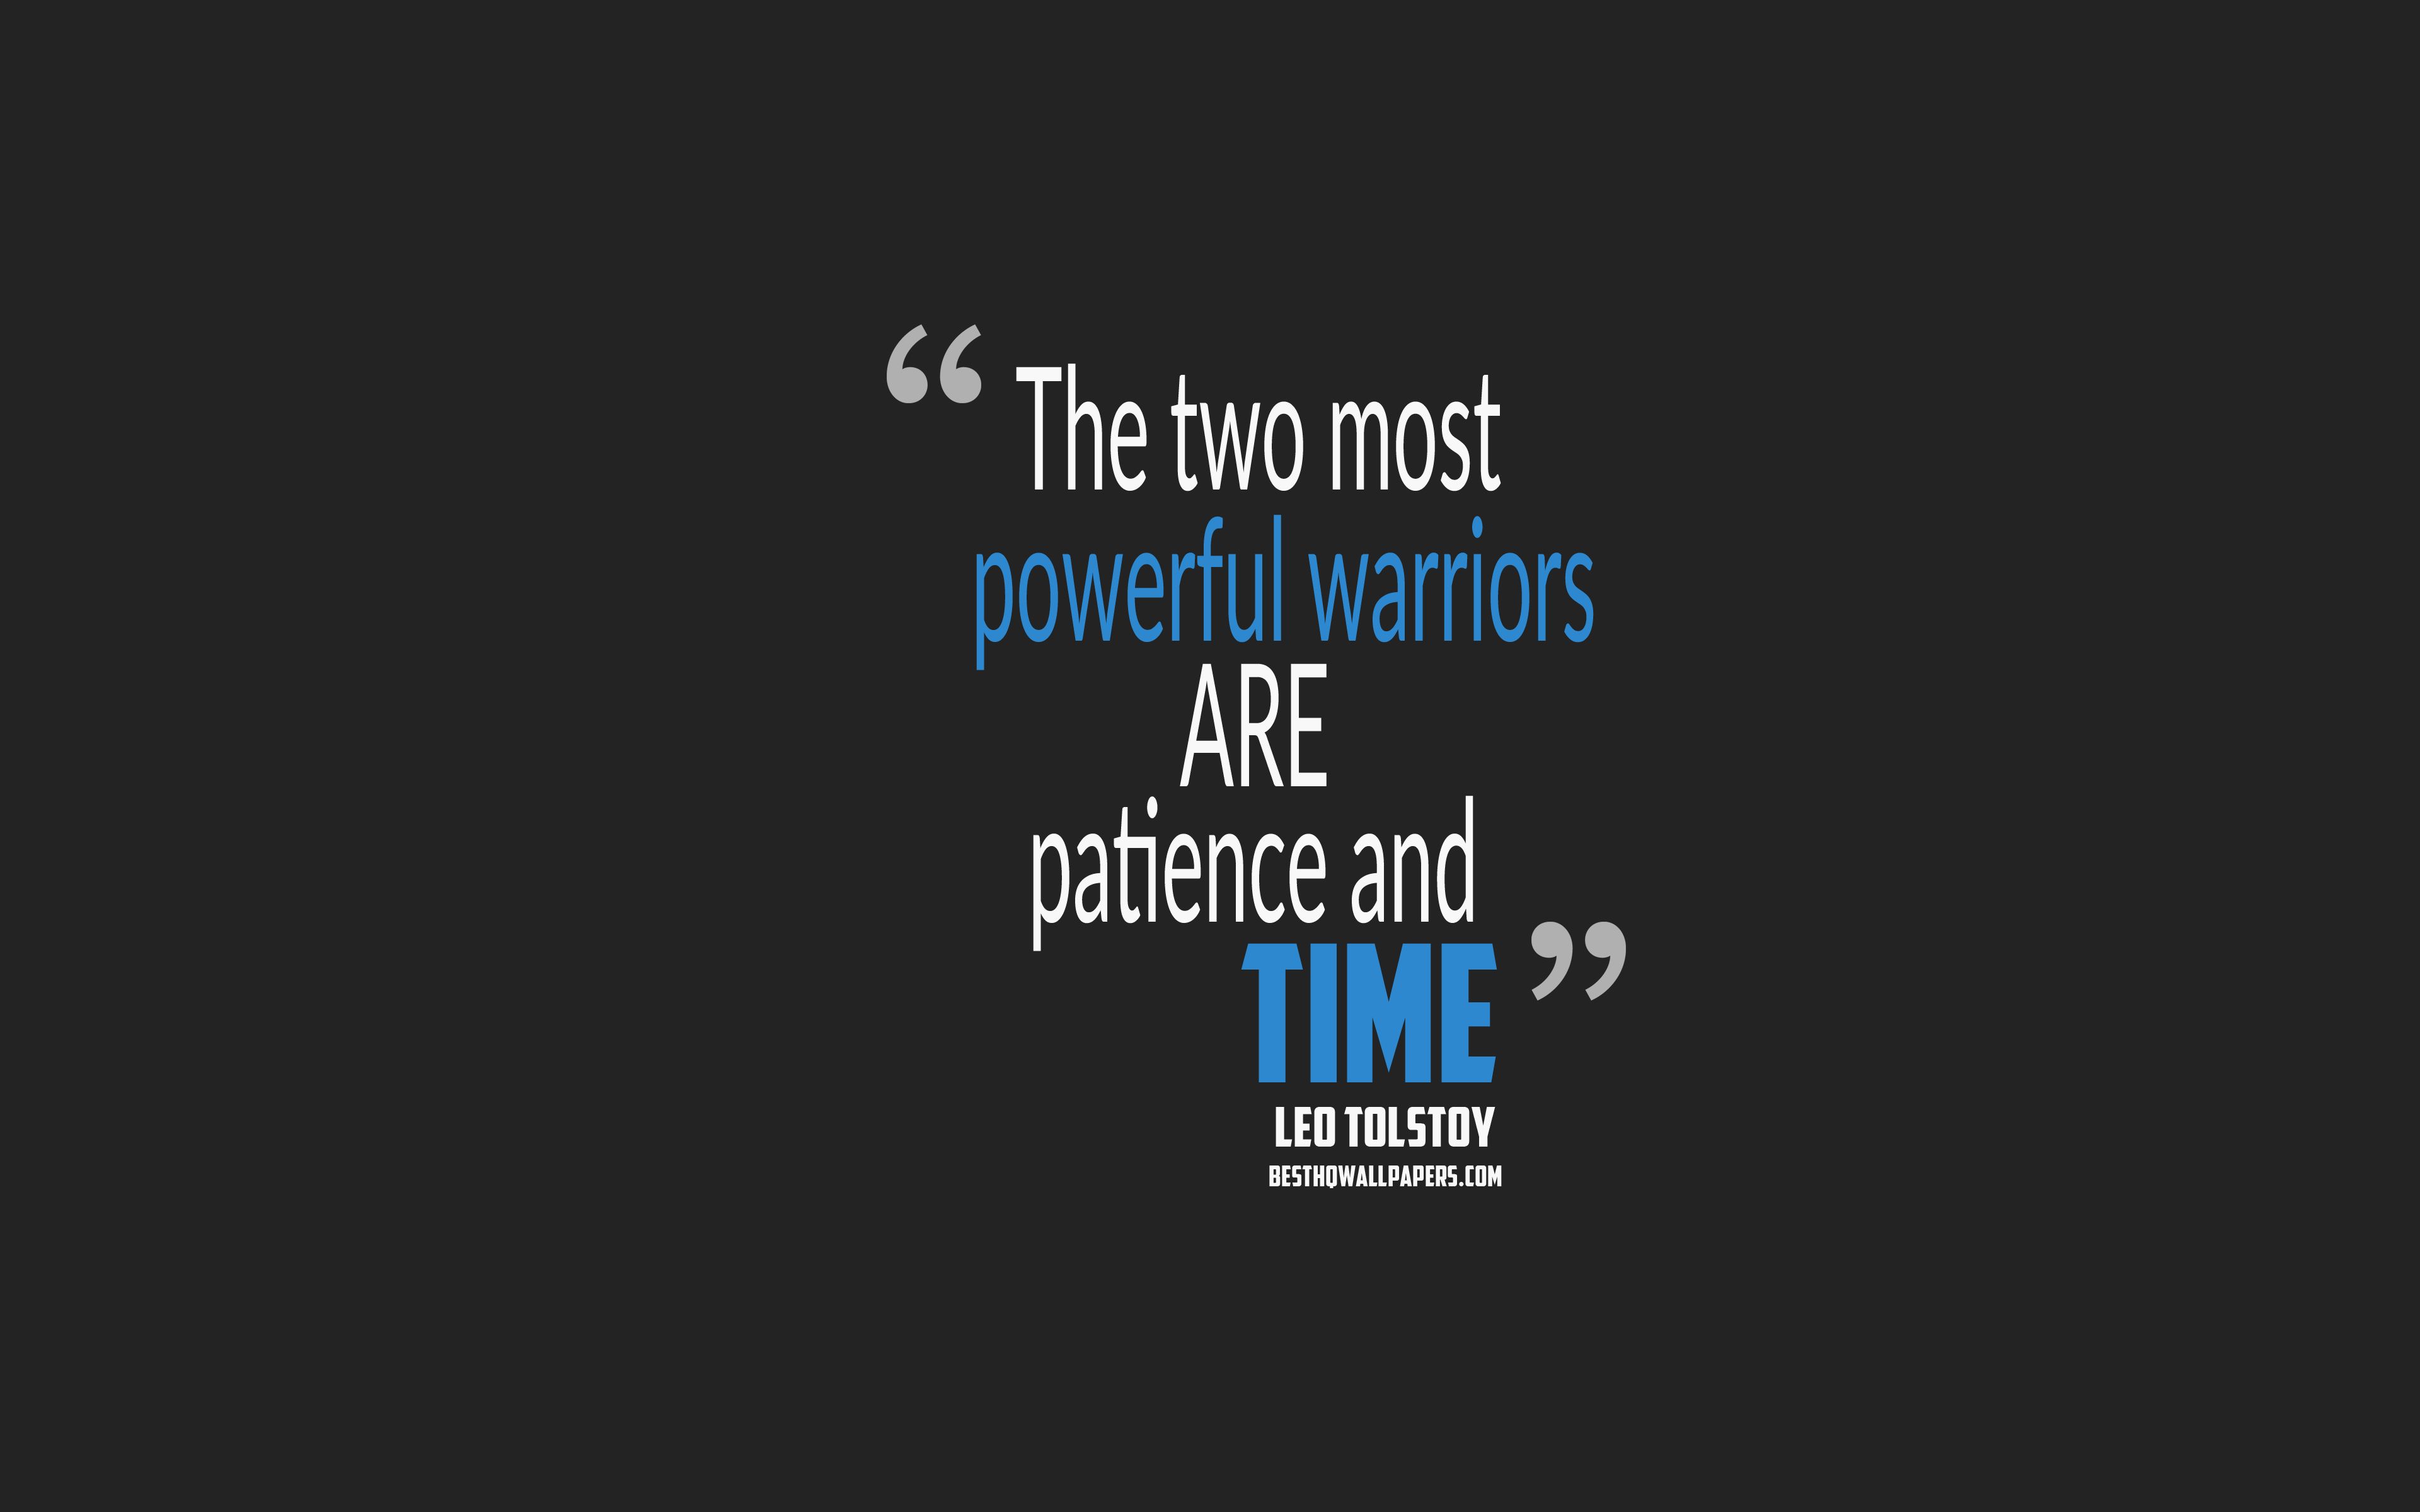 Download wallpaper The two most powerful warriors are patience